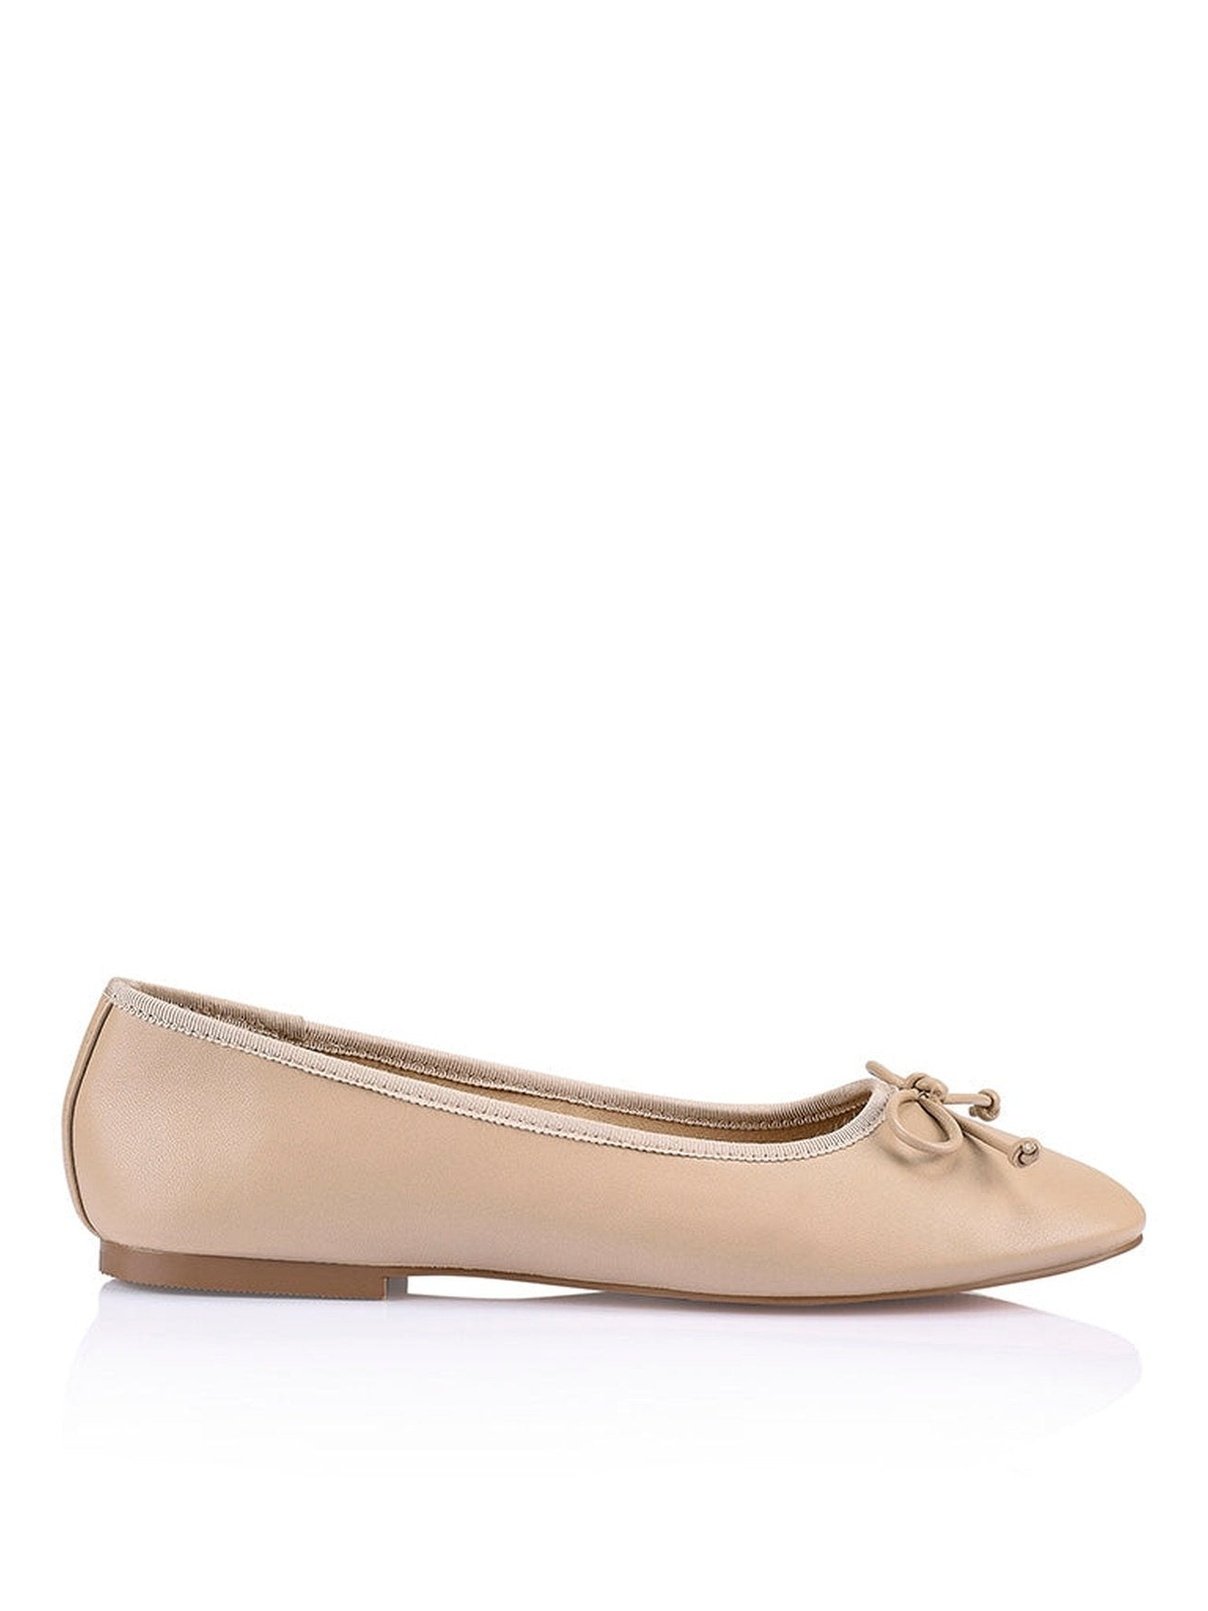 Ballet Flats - Nude Leather Siren Shoes